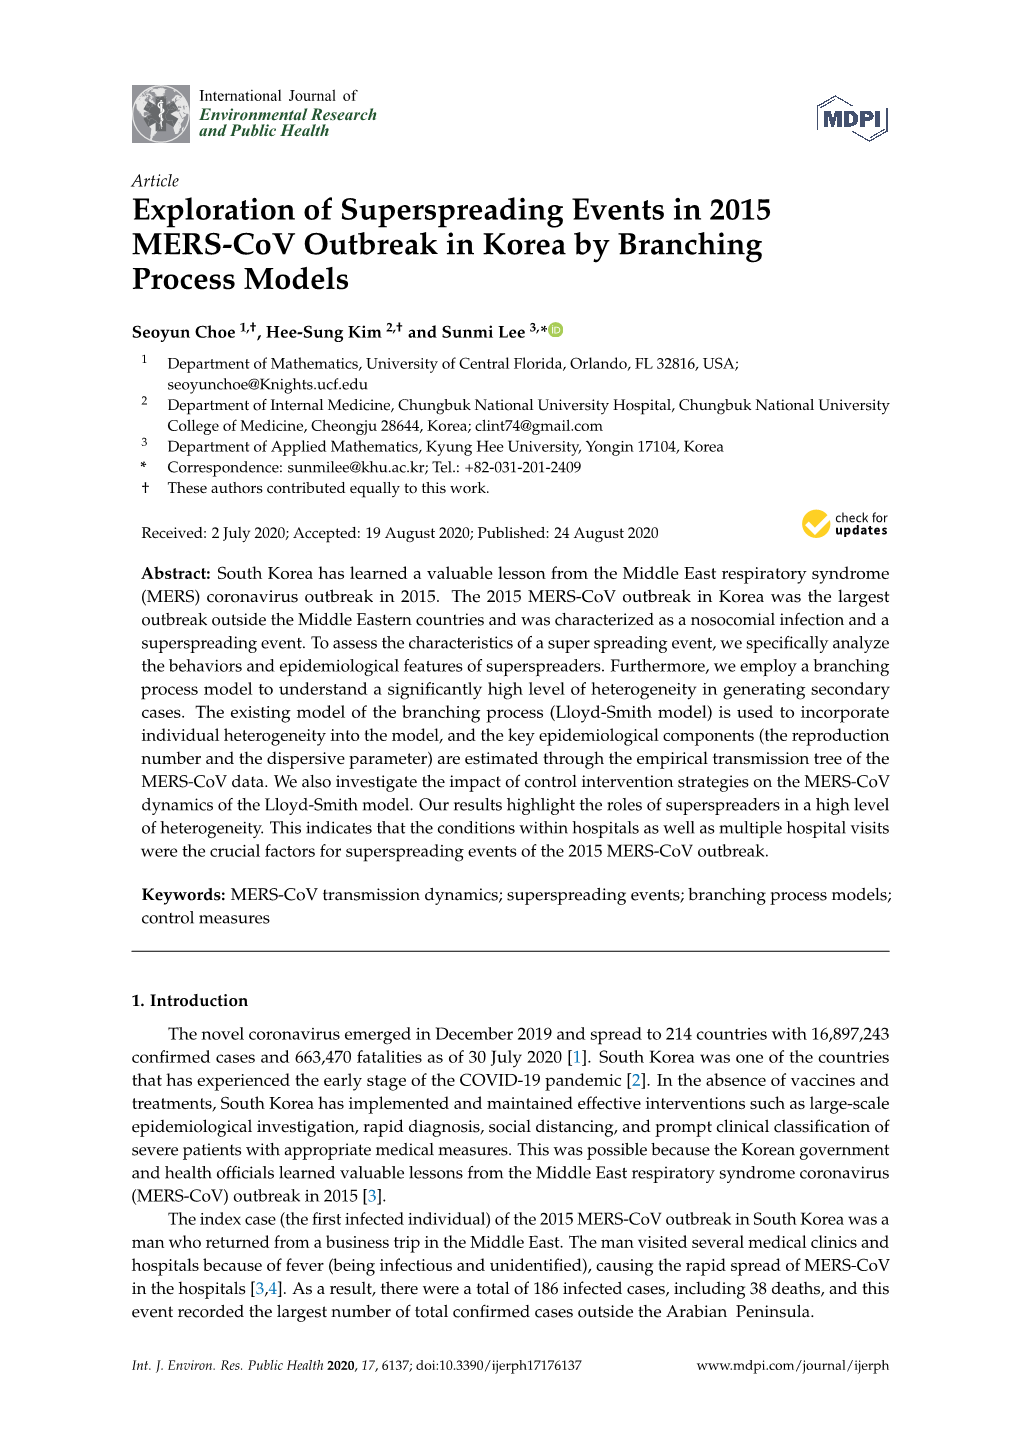 Exploration of Superspreading Events in 2015 MERS-Cov Outbreak in Korea by Branching Process Models